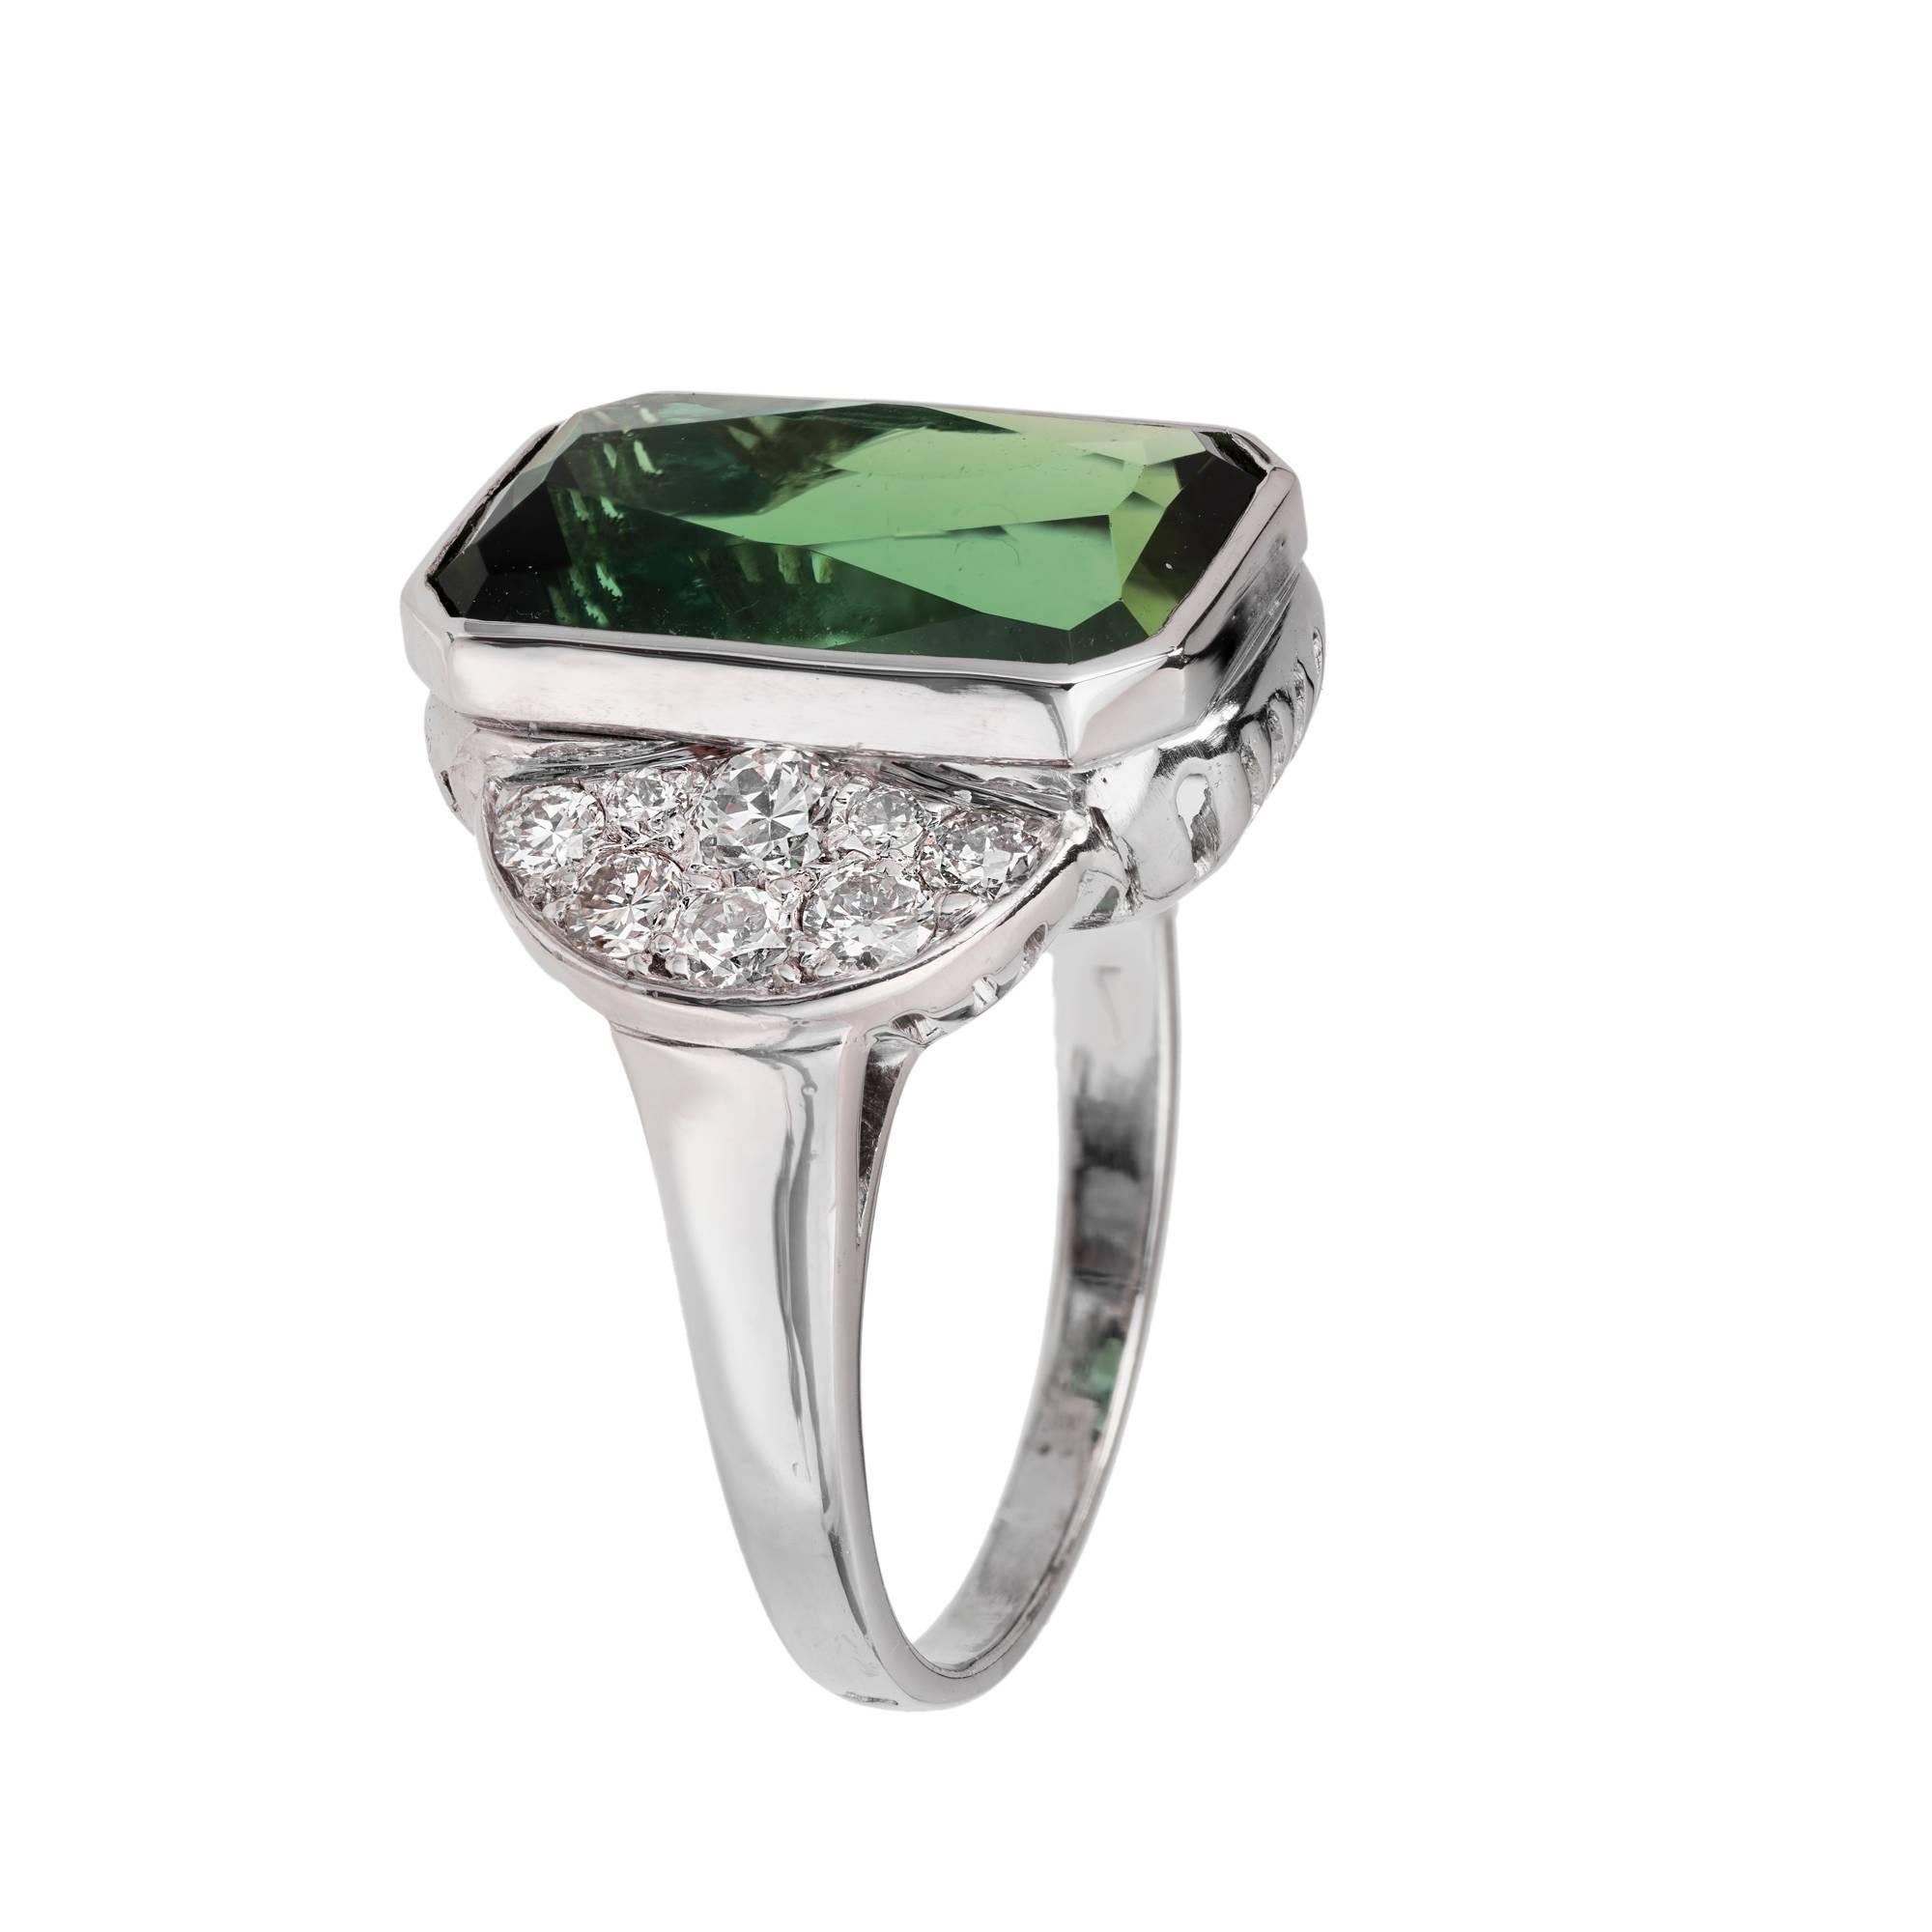 Vintage 1950-1960 octagonal elongated green Tourmaline and diamond ring. 7.46ct center tourmaline with 16 full cut Pavé Diamonds in a platinum setting. Gubelin certified as natural Tourmaline.

1 octagonal bright green natural Tourmaline, approx.